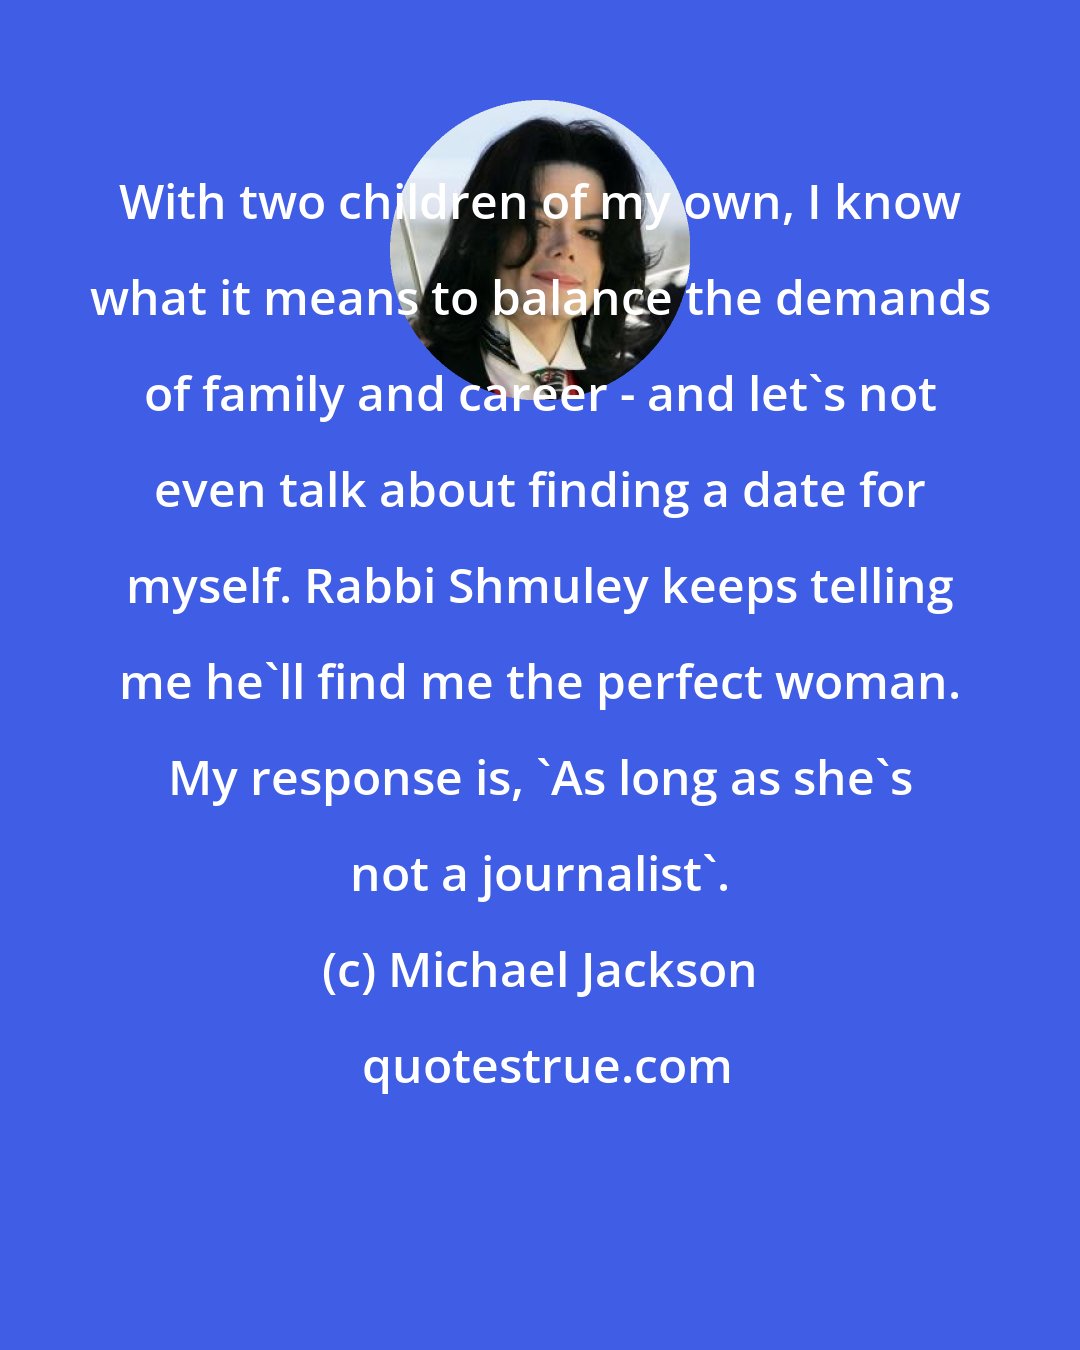 Michael Jackson: With two children of my own, I know what it means to balance the demands of family and career - and let's not even talk about finding a date for myself. Rabbi Shmuley keeps telling me he'll find me the perfect woman. My response is, 'As long as she's not a journalist'.